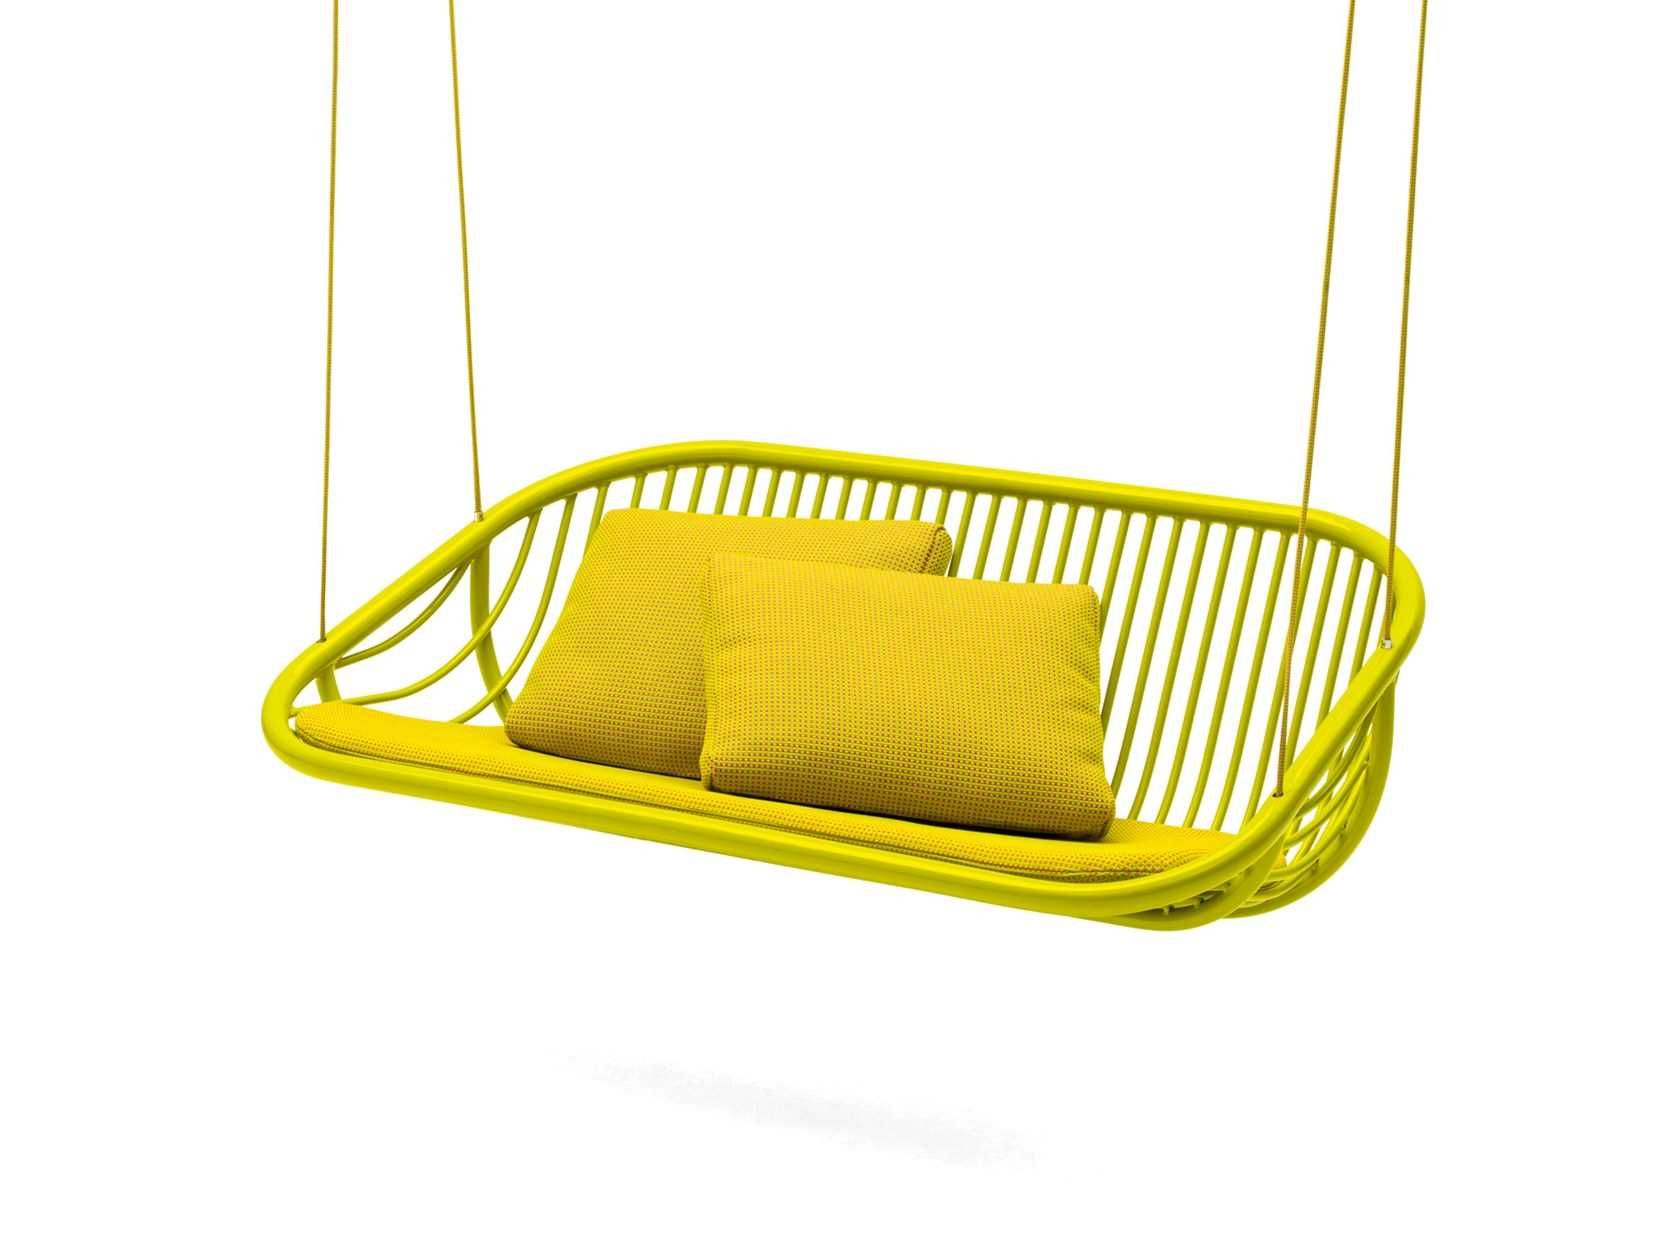 2 Seater synthetic fibre garden hanging chair